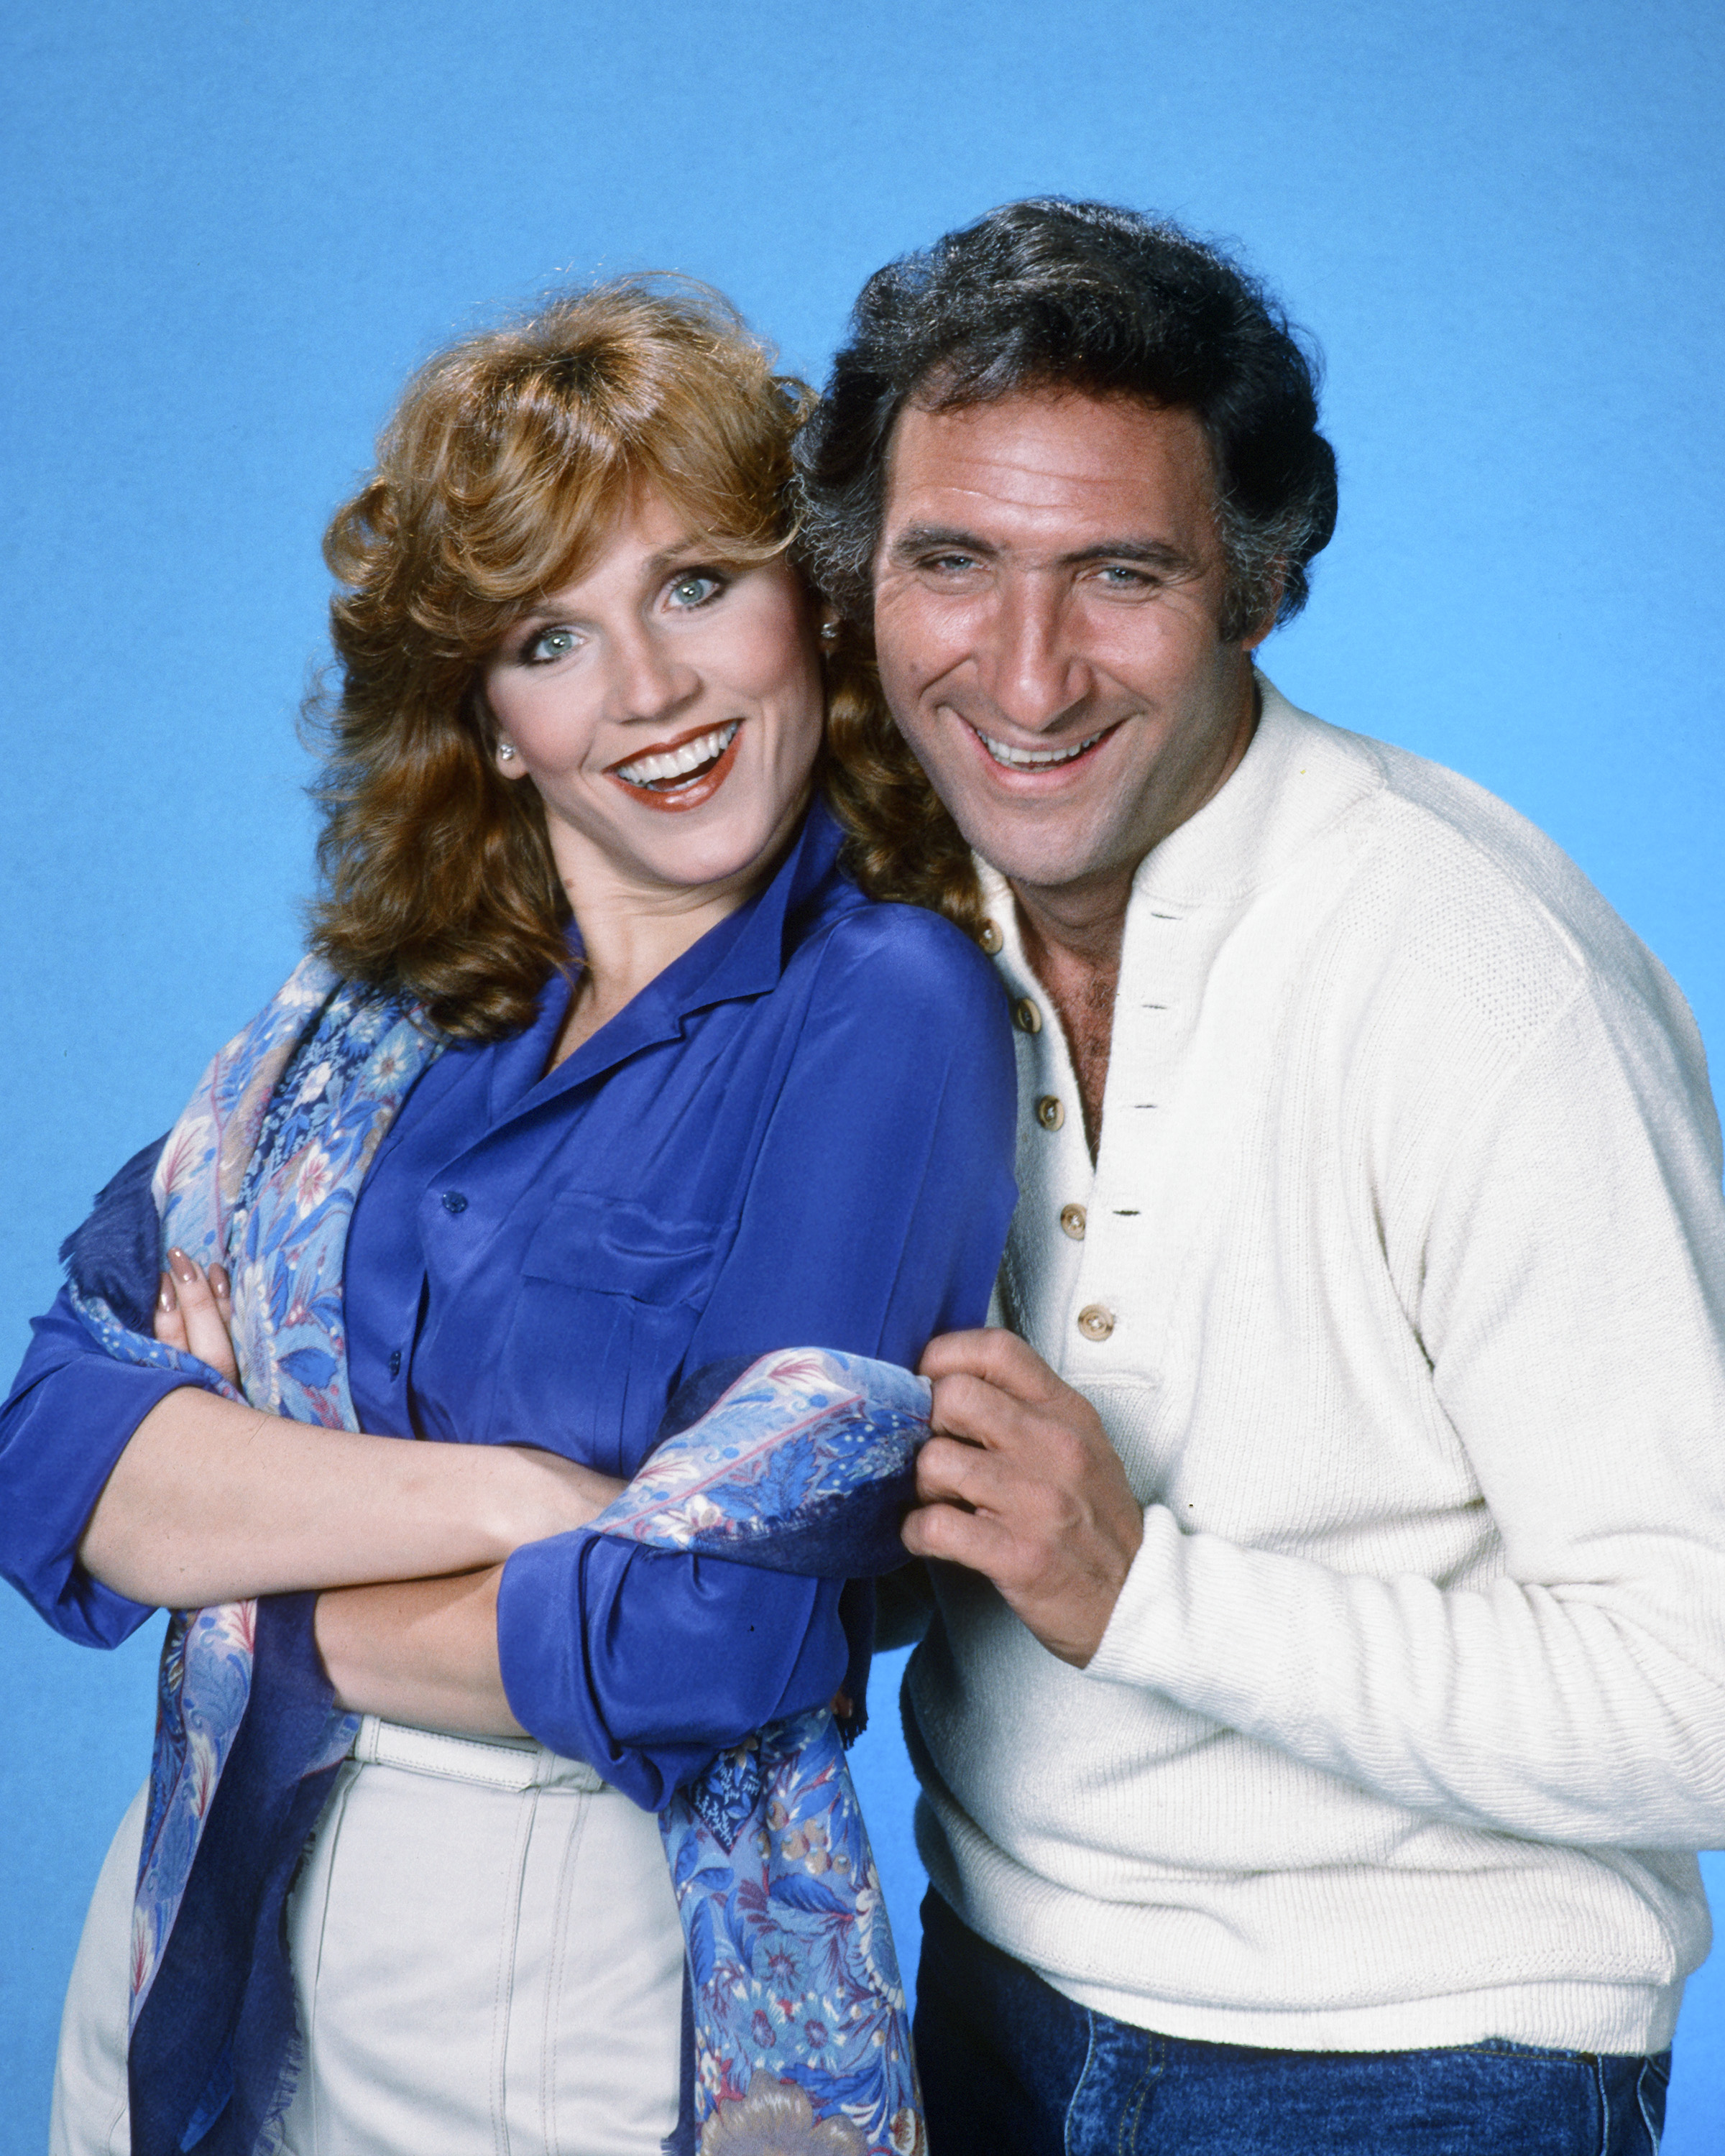 Marilu Henner and Judd Hirsch on "Taxi" Season Five in 1982 | Source: Getty Images